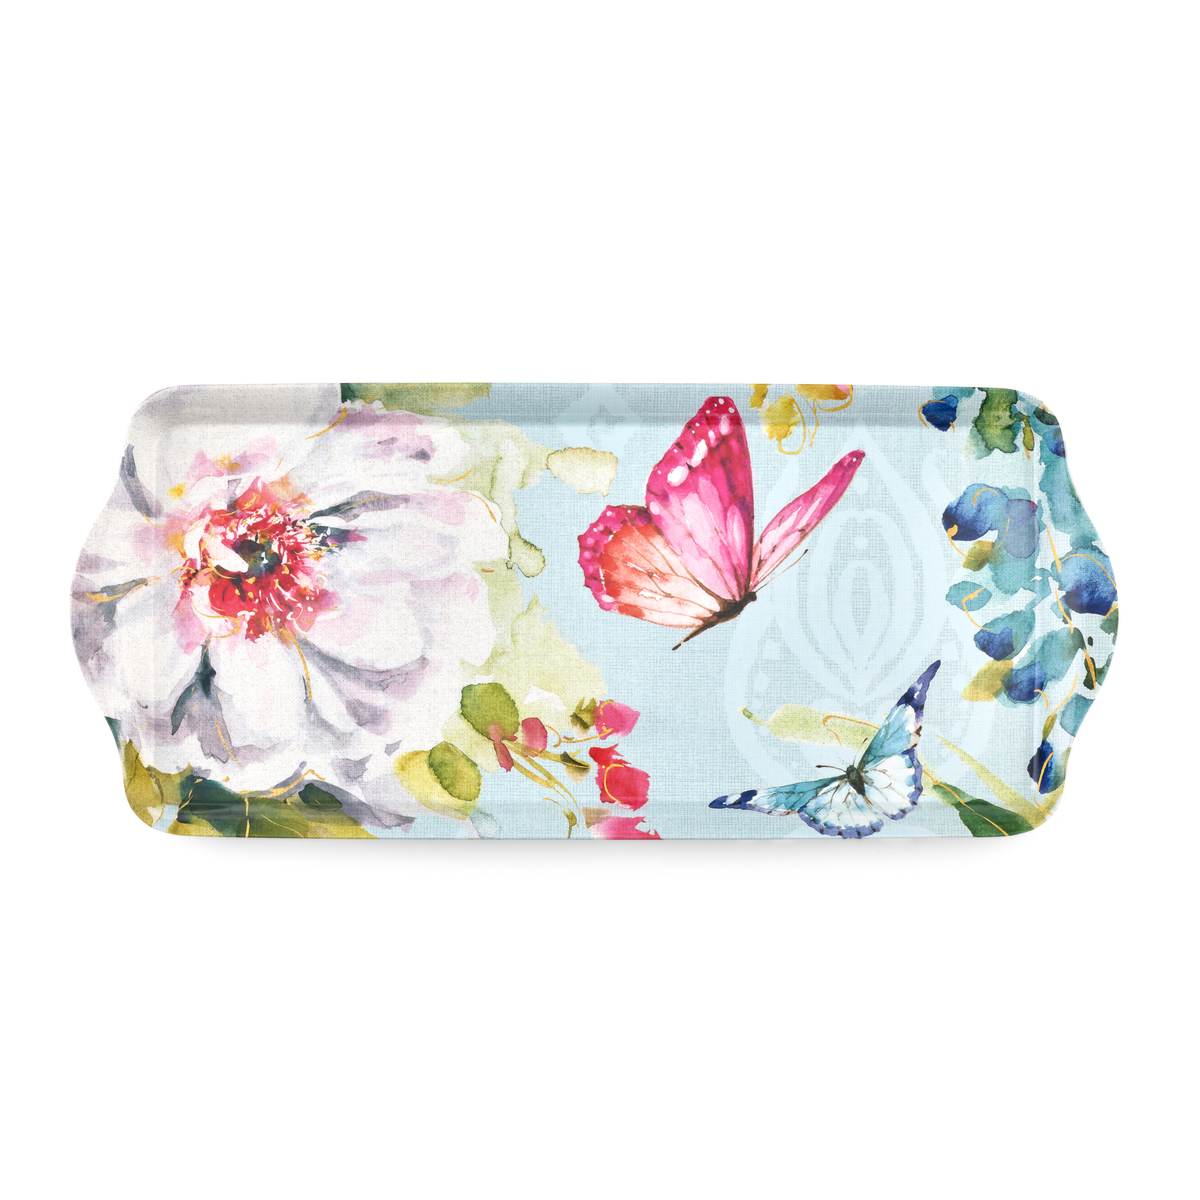 Pimpernel Colorful Breeze Sandwich Tray image number null